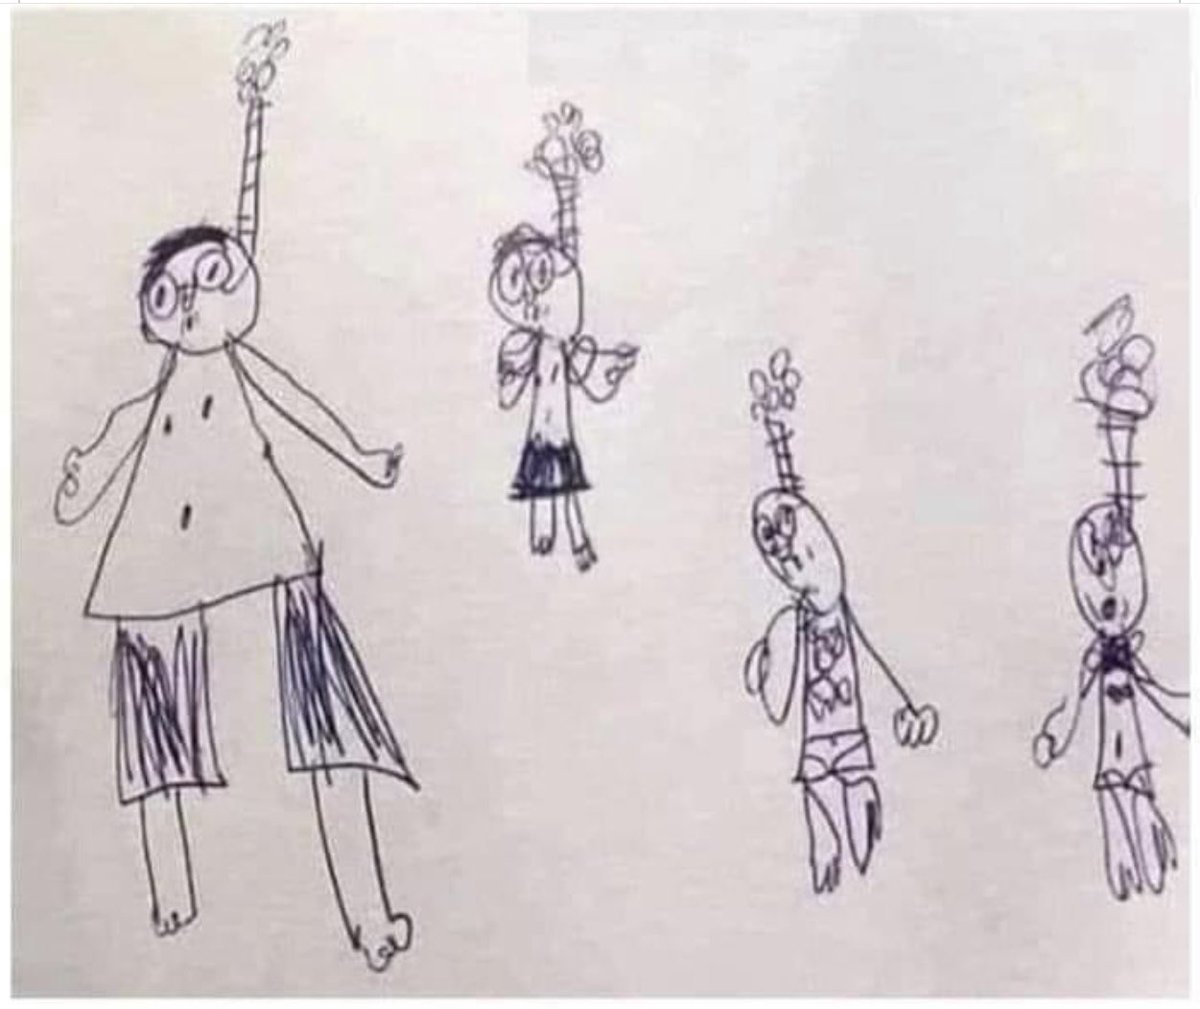 😊 Our six-year-old handed us a note. His teacher had called us in for an emergency meeting. Teacher: “I asked him to draw his family and he drew this. Would vou mind explaining?” “Not at all”, my wife said. “Family vacation. Snorkelling off the Bahamas.”